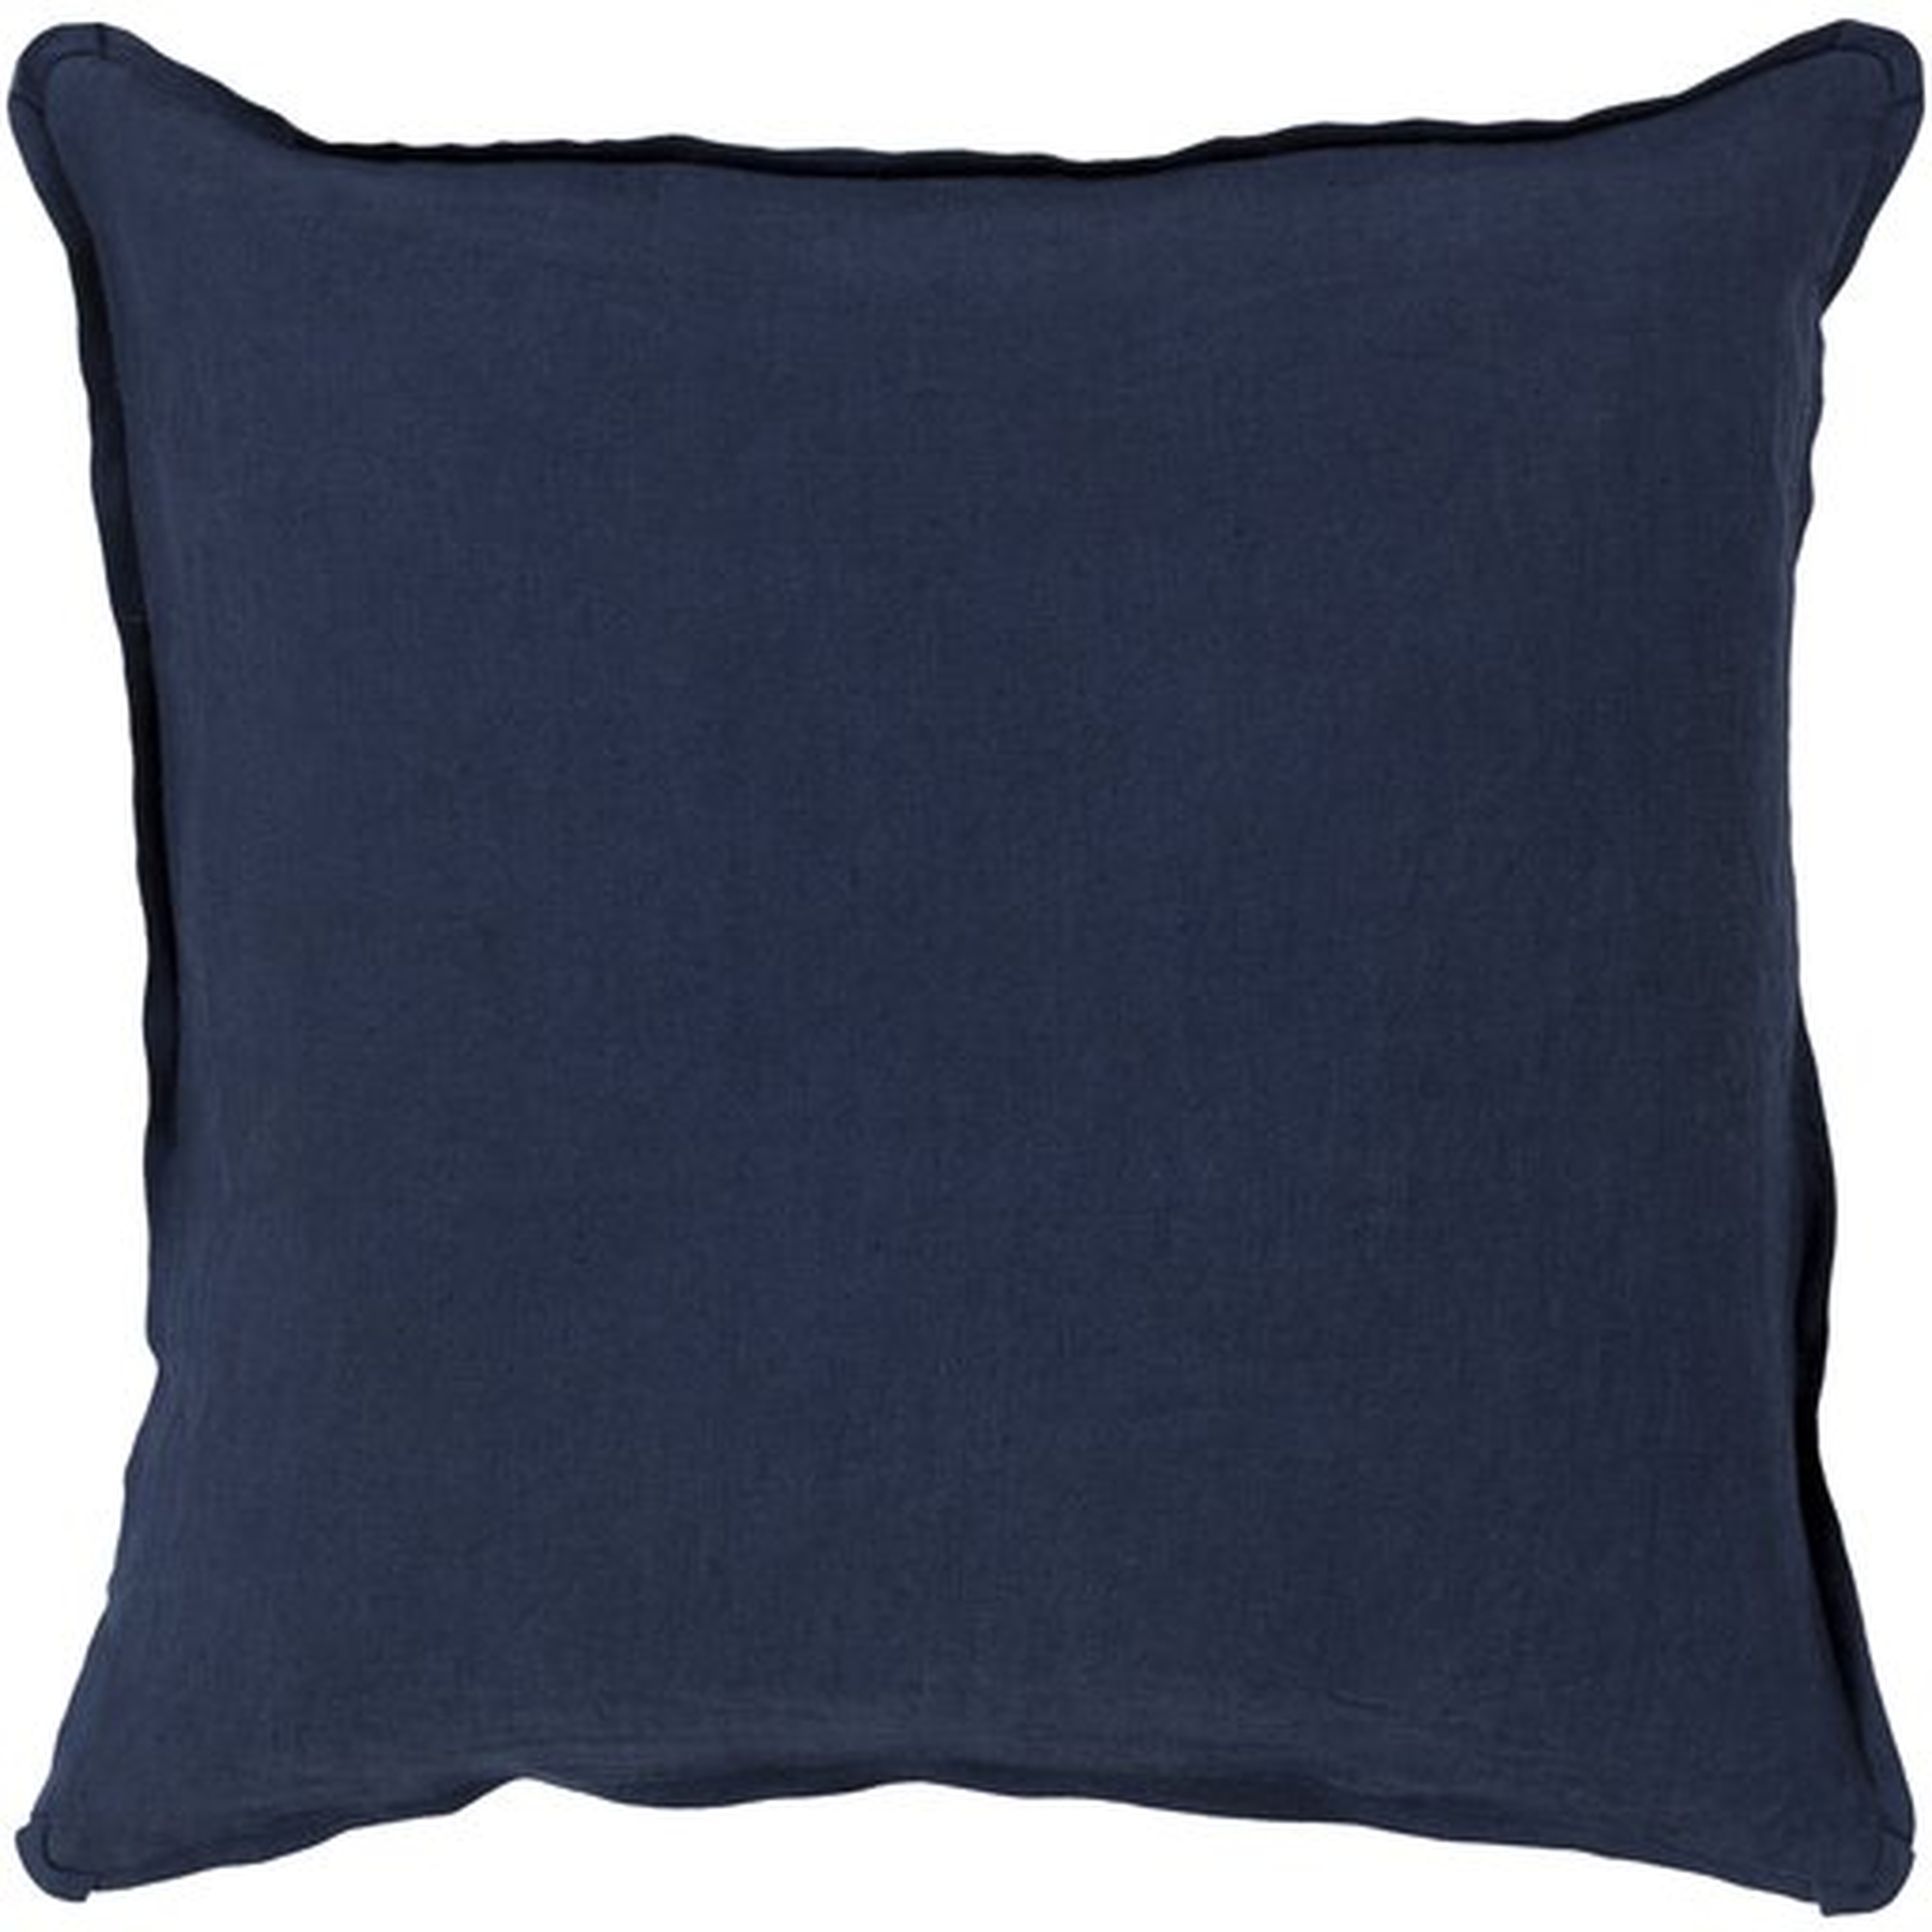 Solid Navy Linen Pillow, with down insert - Surya